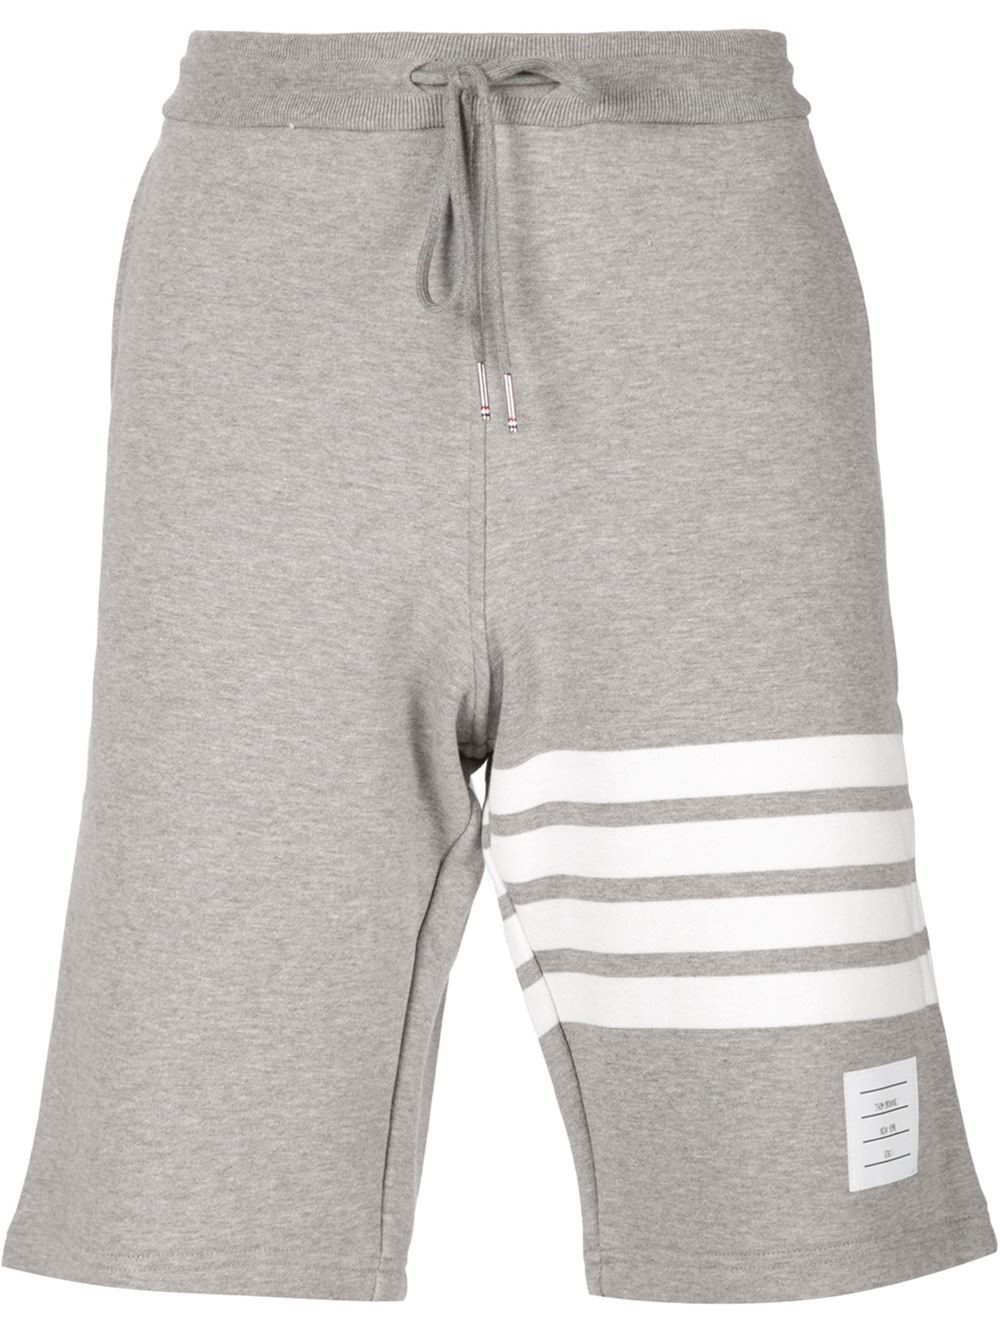 THOM BROWNE LIGHT GREY CLASSIC SWEAT SHORTS WITH ENGINEERED 4, GRAY ...